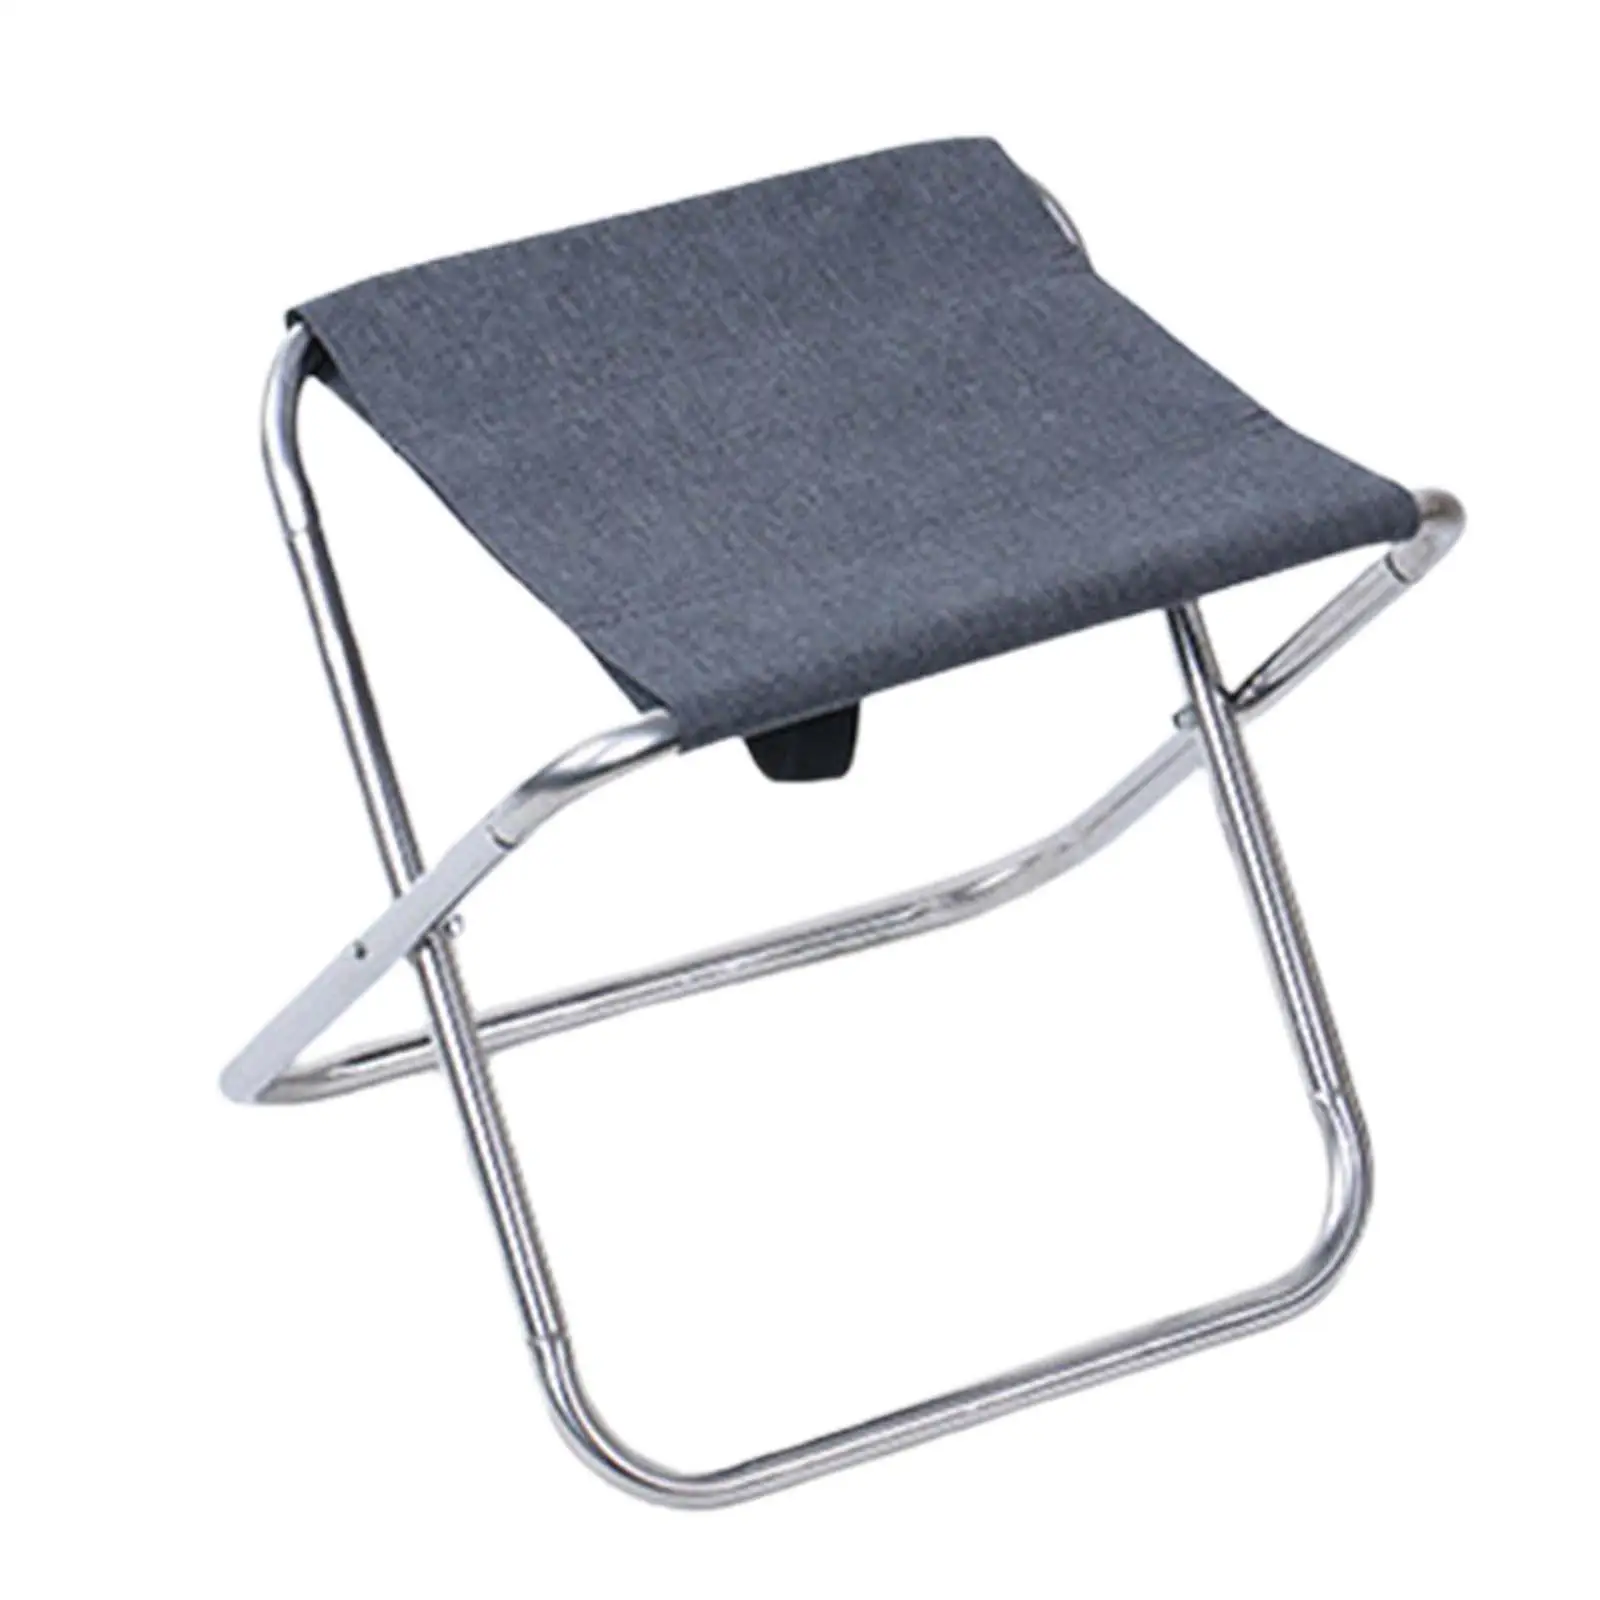 Camping Stool Folding Ultralight Wear Resistant Camp Stool Fishing Seat Fishing Chair for Hiking BBQ Traveling Fishing Picnic